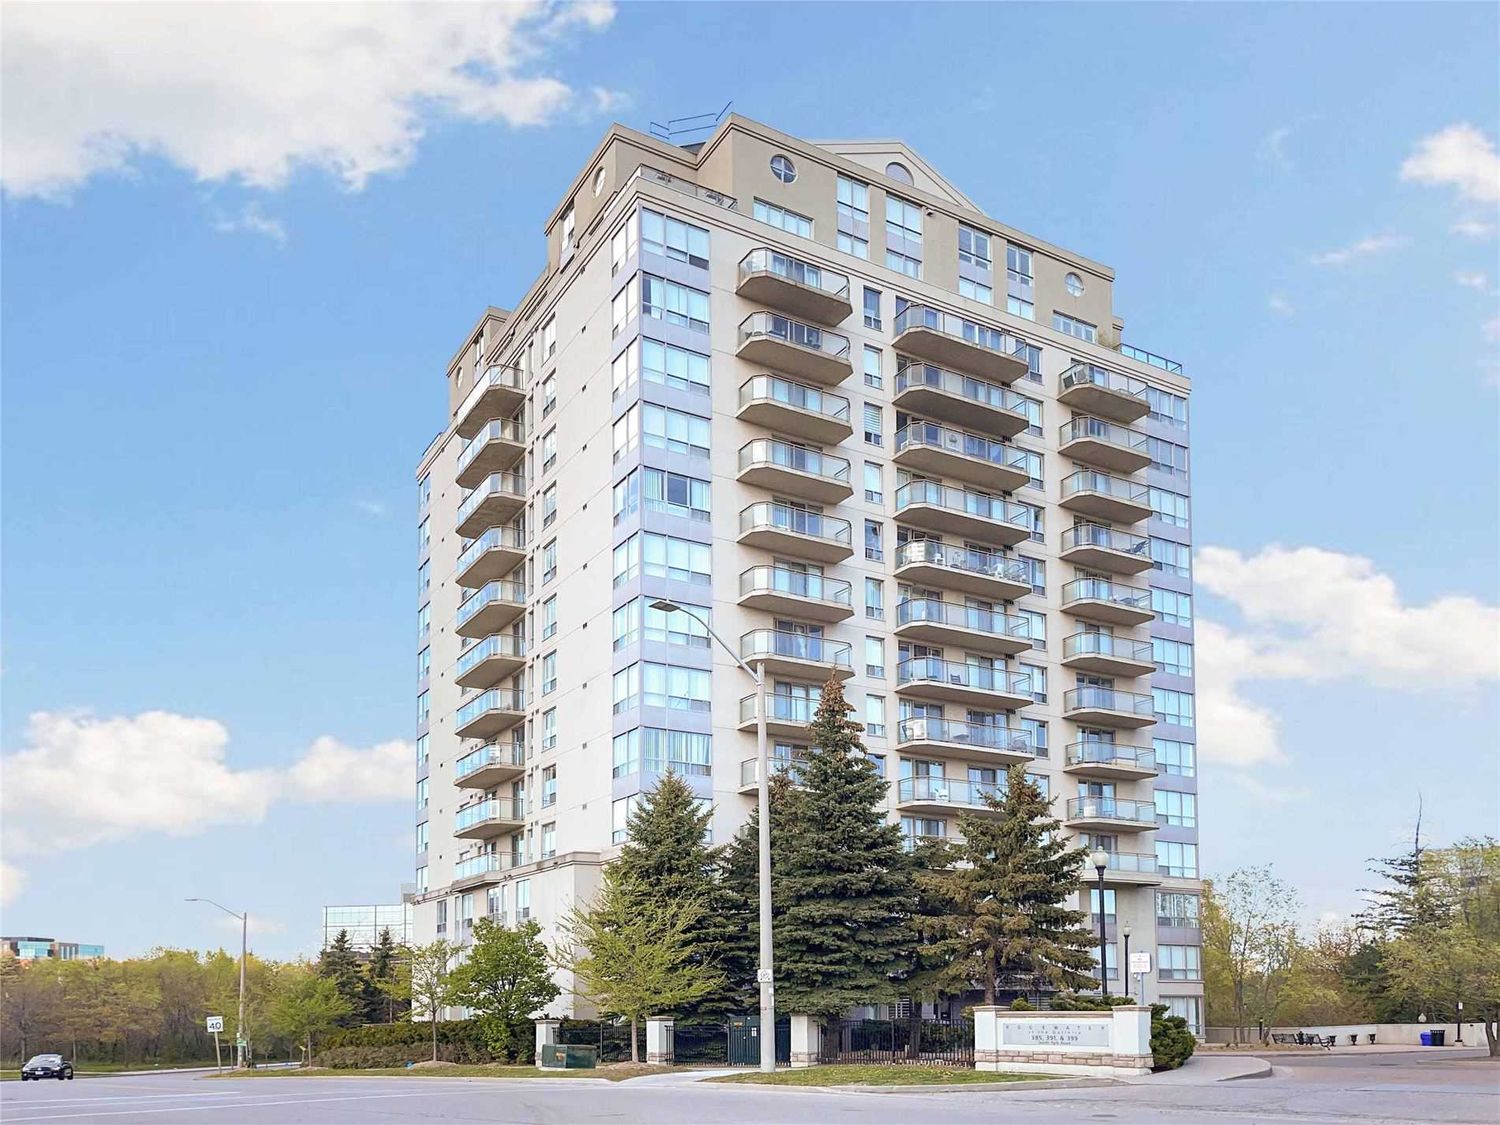 385-399 South Park Road. Edgewater at the Galleria Condos is located in  Markham, Toronto - image #1 of 2